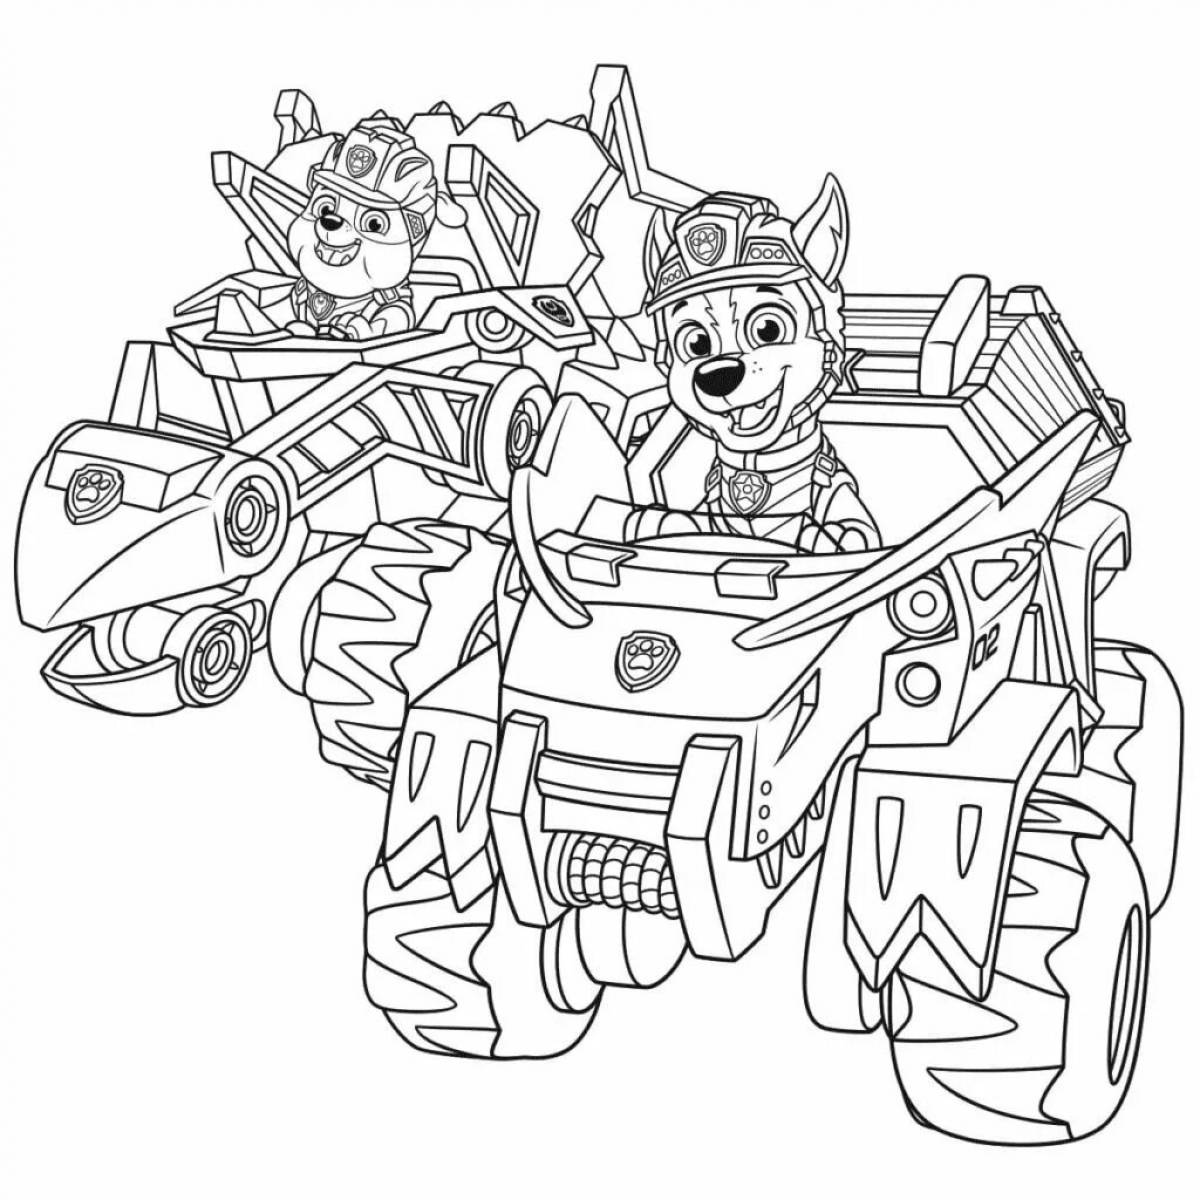 Witty Paw Patrol coloring book